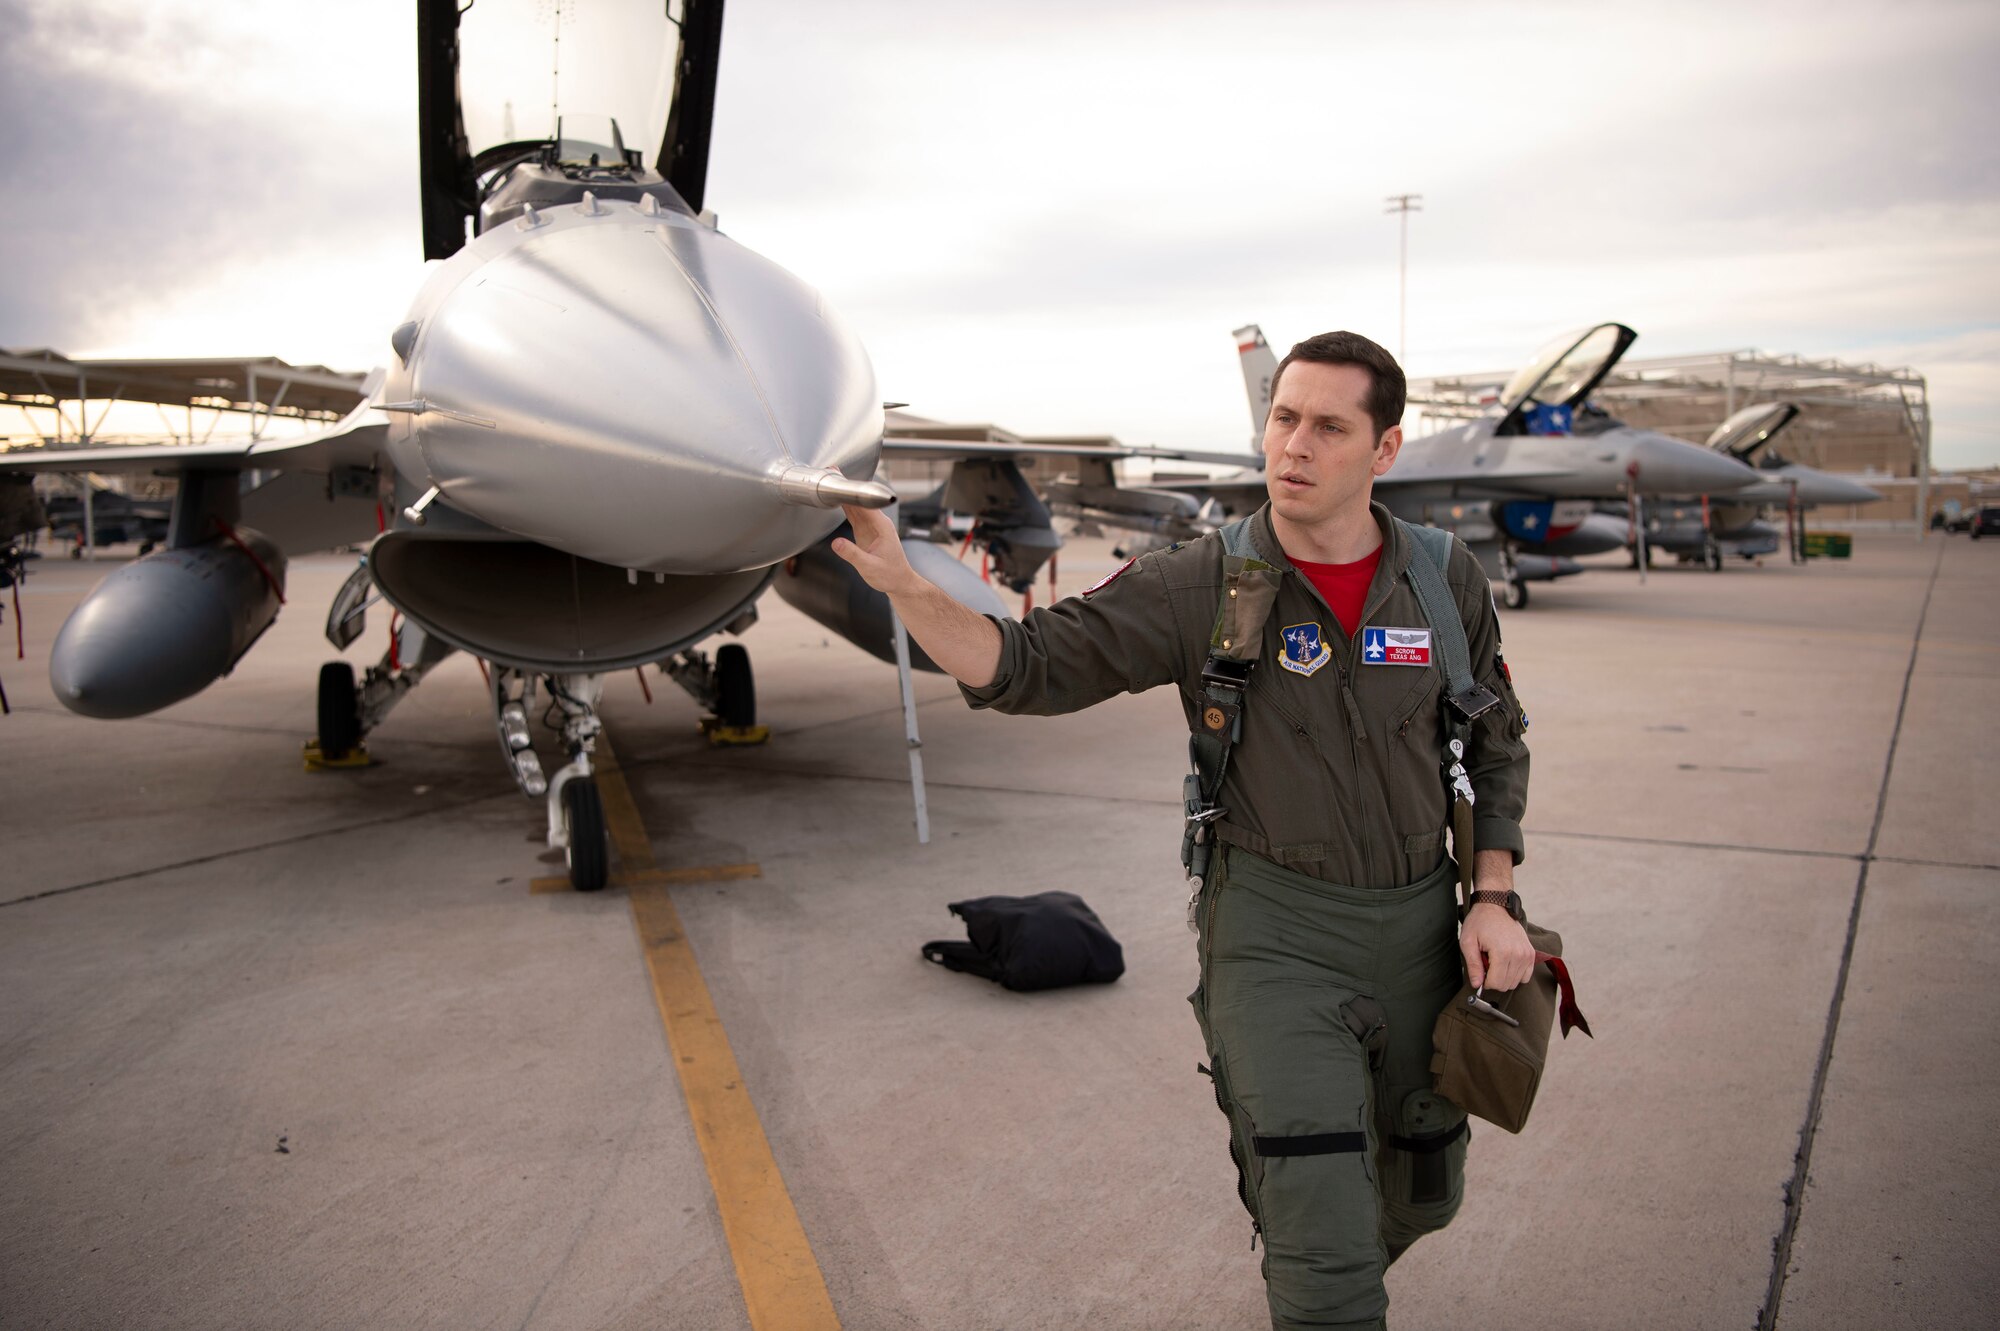 First Lt. James Demkowicz, a student F-16 pilot assigned to the 149th Fighter Wing, Air National Guard, conducts pre-flight checks prior to launch during Coronet Cactus, Feb. 28, 2020, at Luke Air Force Base, Ariz. The annual training event deploys members of the 149th FW, headquartered at Joint Base San Antonio-Lackland, Texas, to another environment in order to familiarize them with accomplishing mission objectives in an unfamiliar location. (Air National Guard photo by Staff Sgt. Derek Davis)